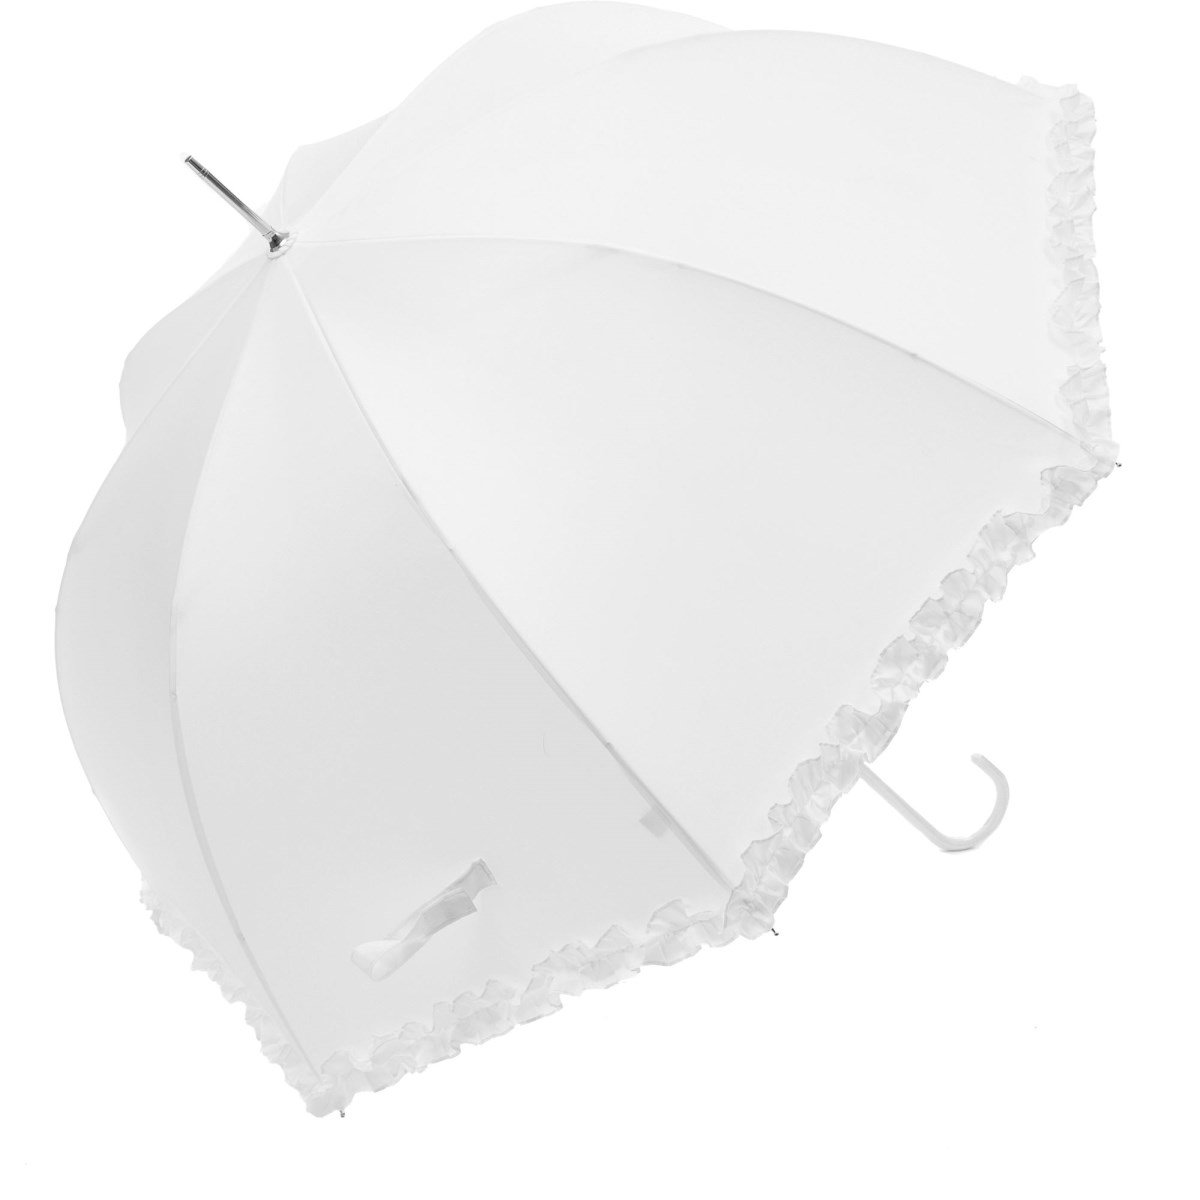 Frilly white walking umbrella, also the ideal frilly white wedding umbrella!